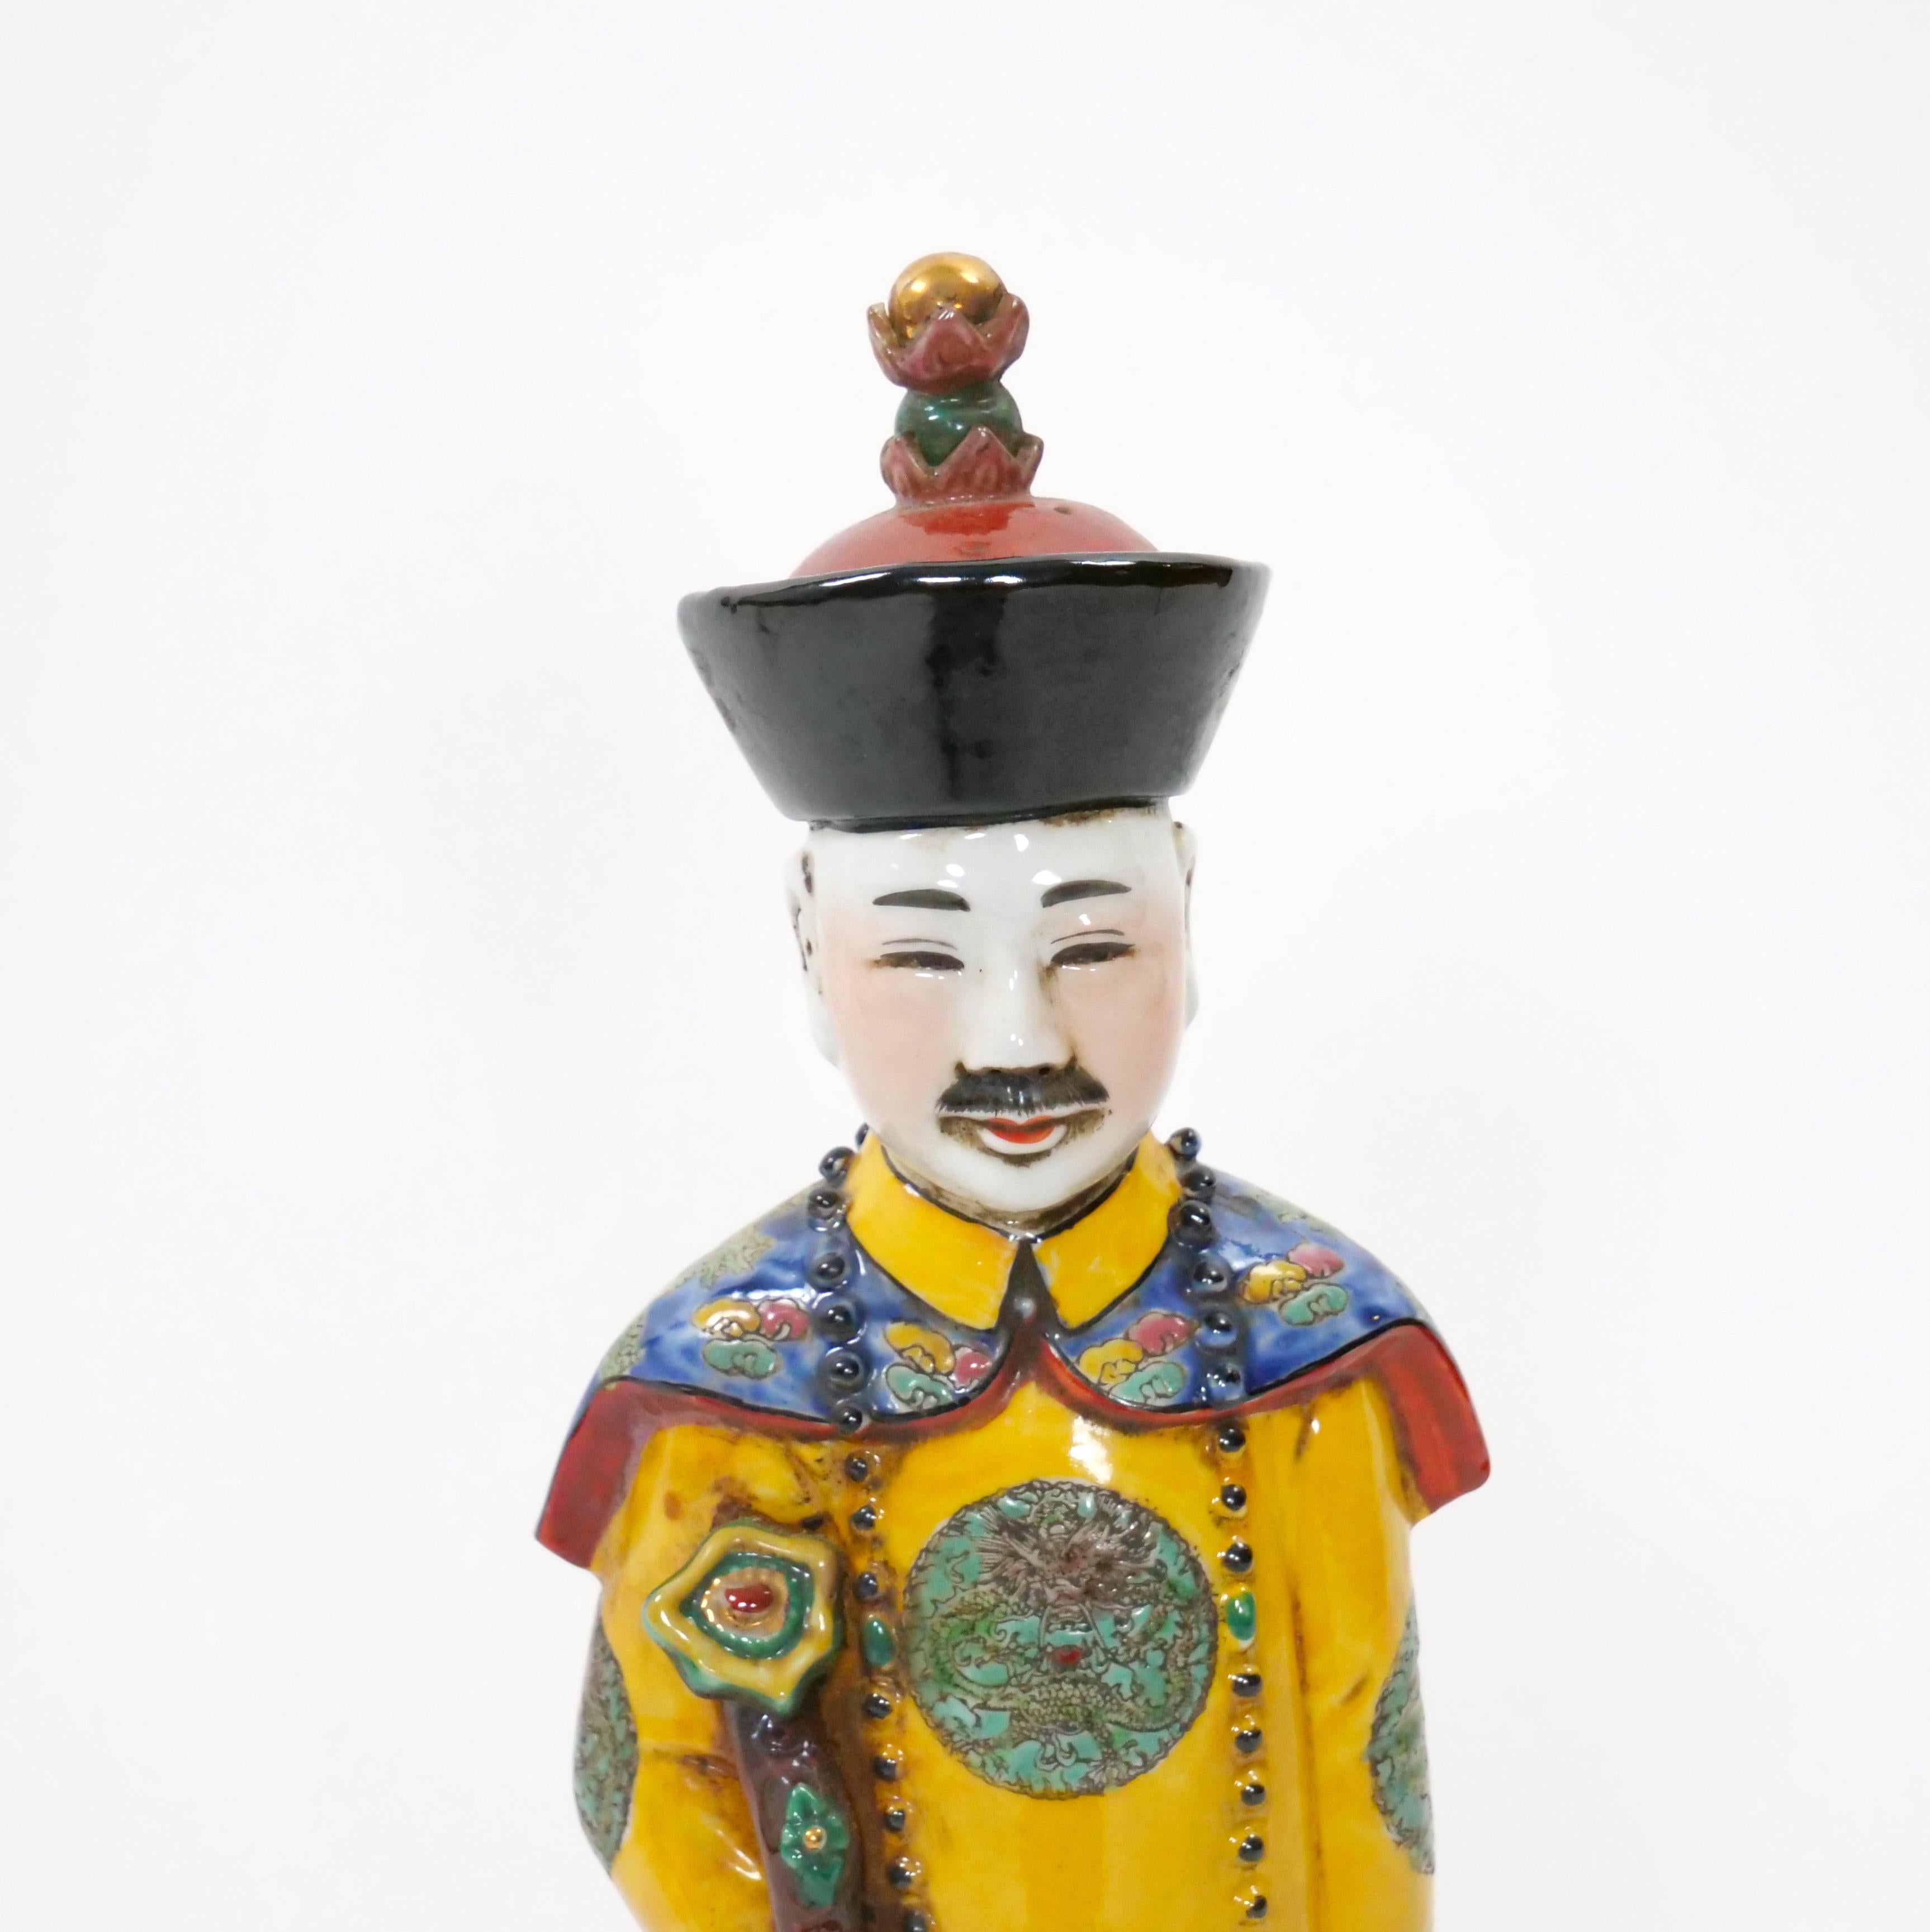 Elevate your collection with this exquisite Chinese porcelain figurine inspired by the illustrious Qing dynasty. Crafted in a stunning wucai style, the figurine depicts a distinguished emperor, regal royal, or a majestic monarch adorned in